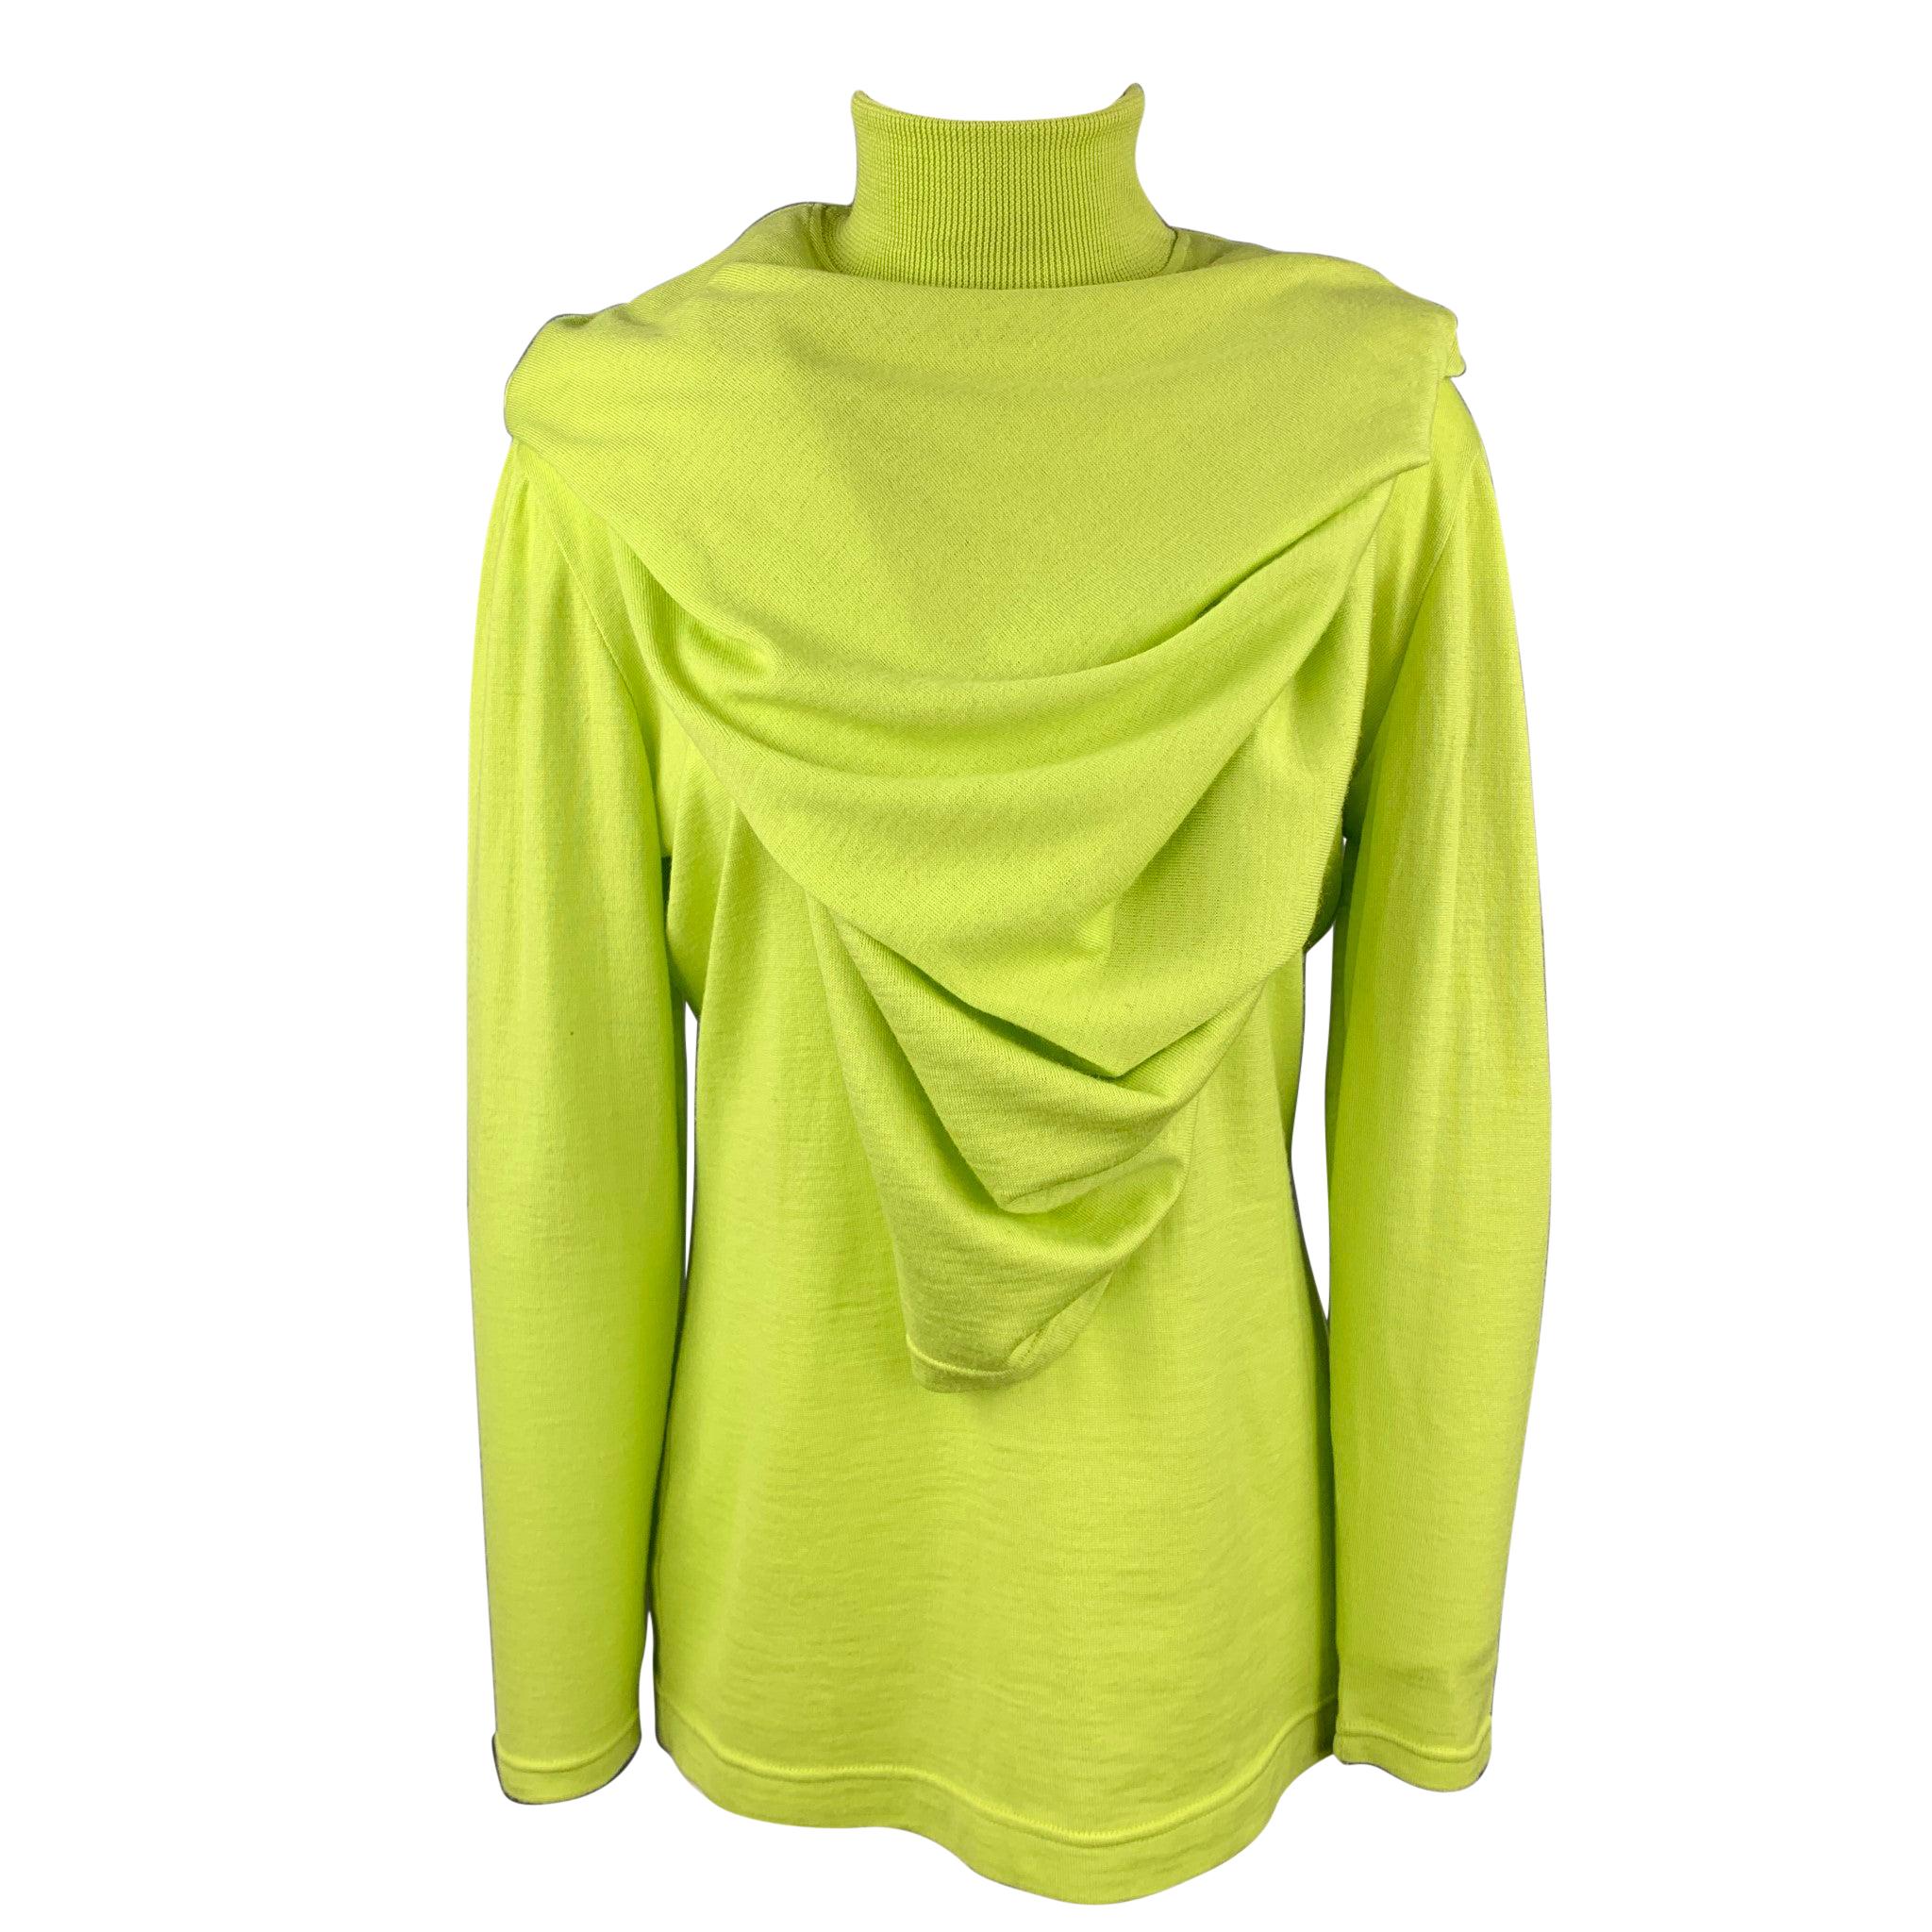 GIANNI VERSACE Size L Lime Green Wool Cape Overlay Turtleneck Sweater